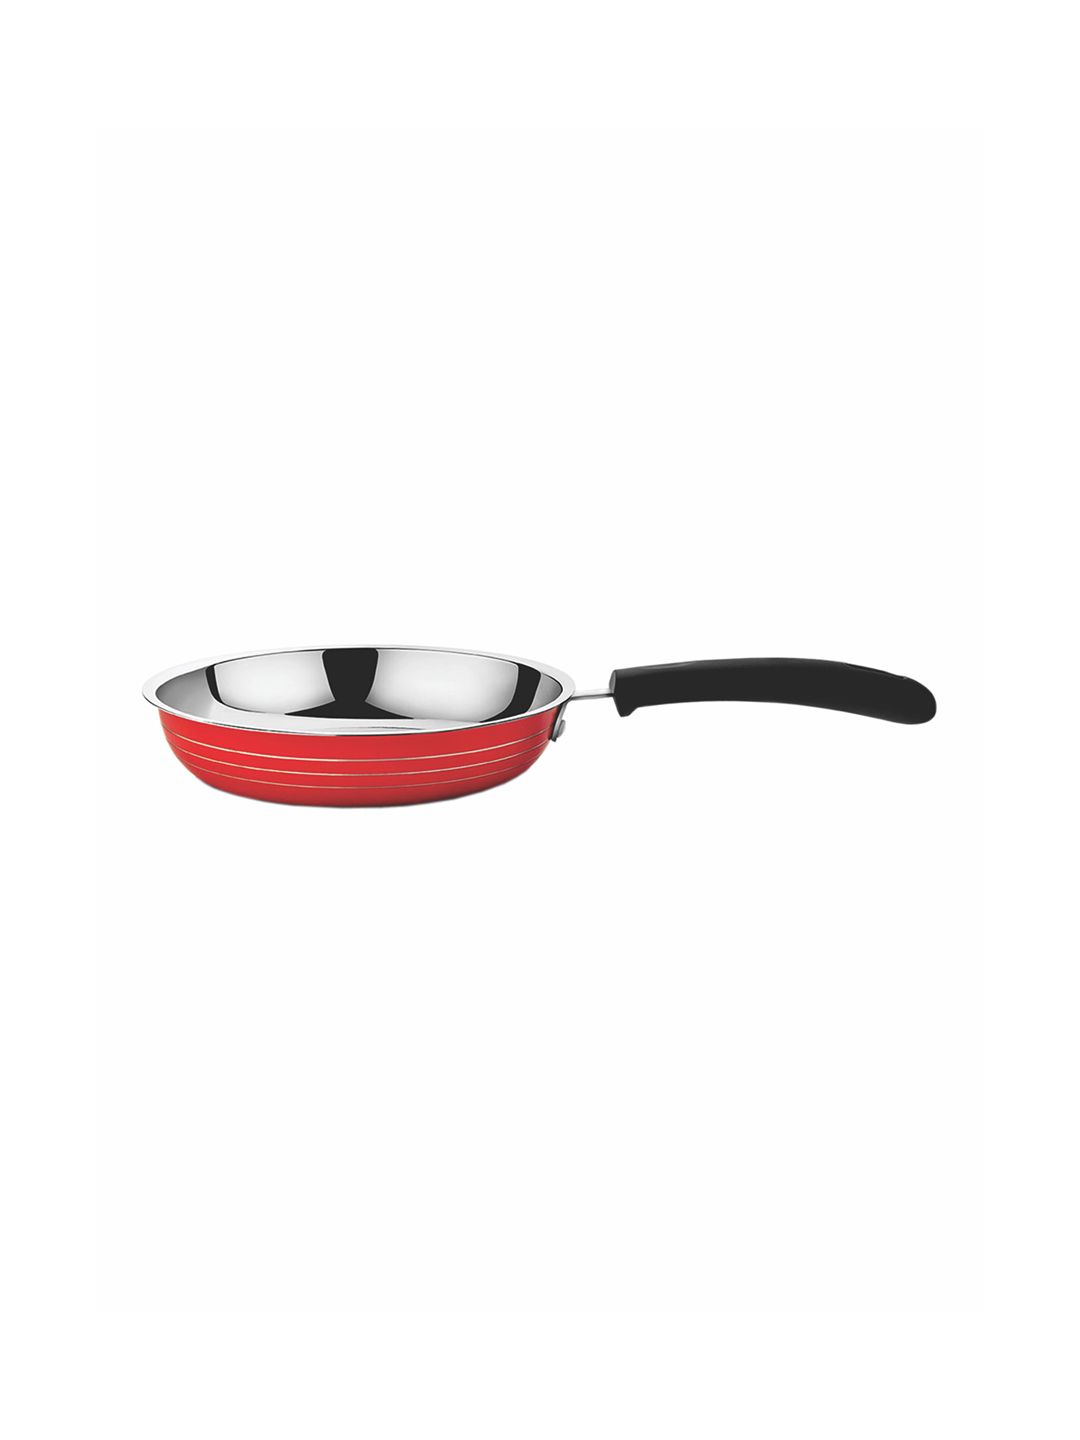 GOODHOMES Red Paradise Fry Pan With Handle Price in India